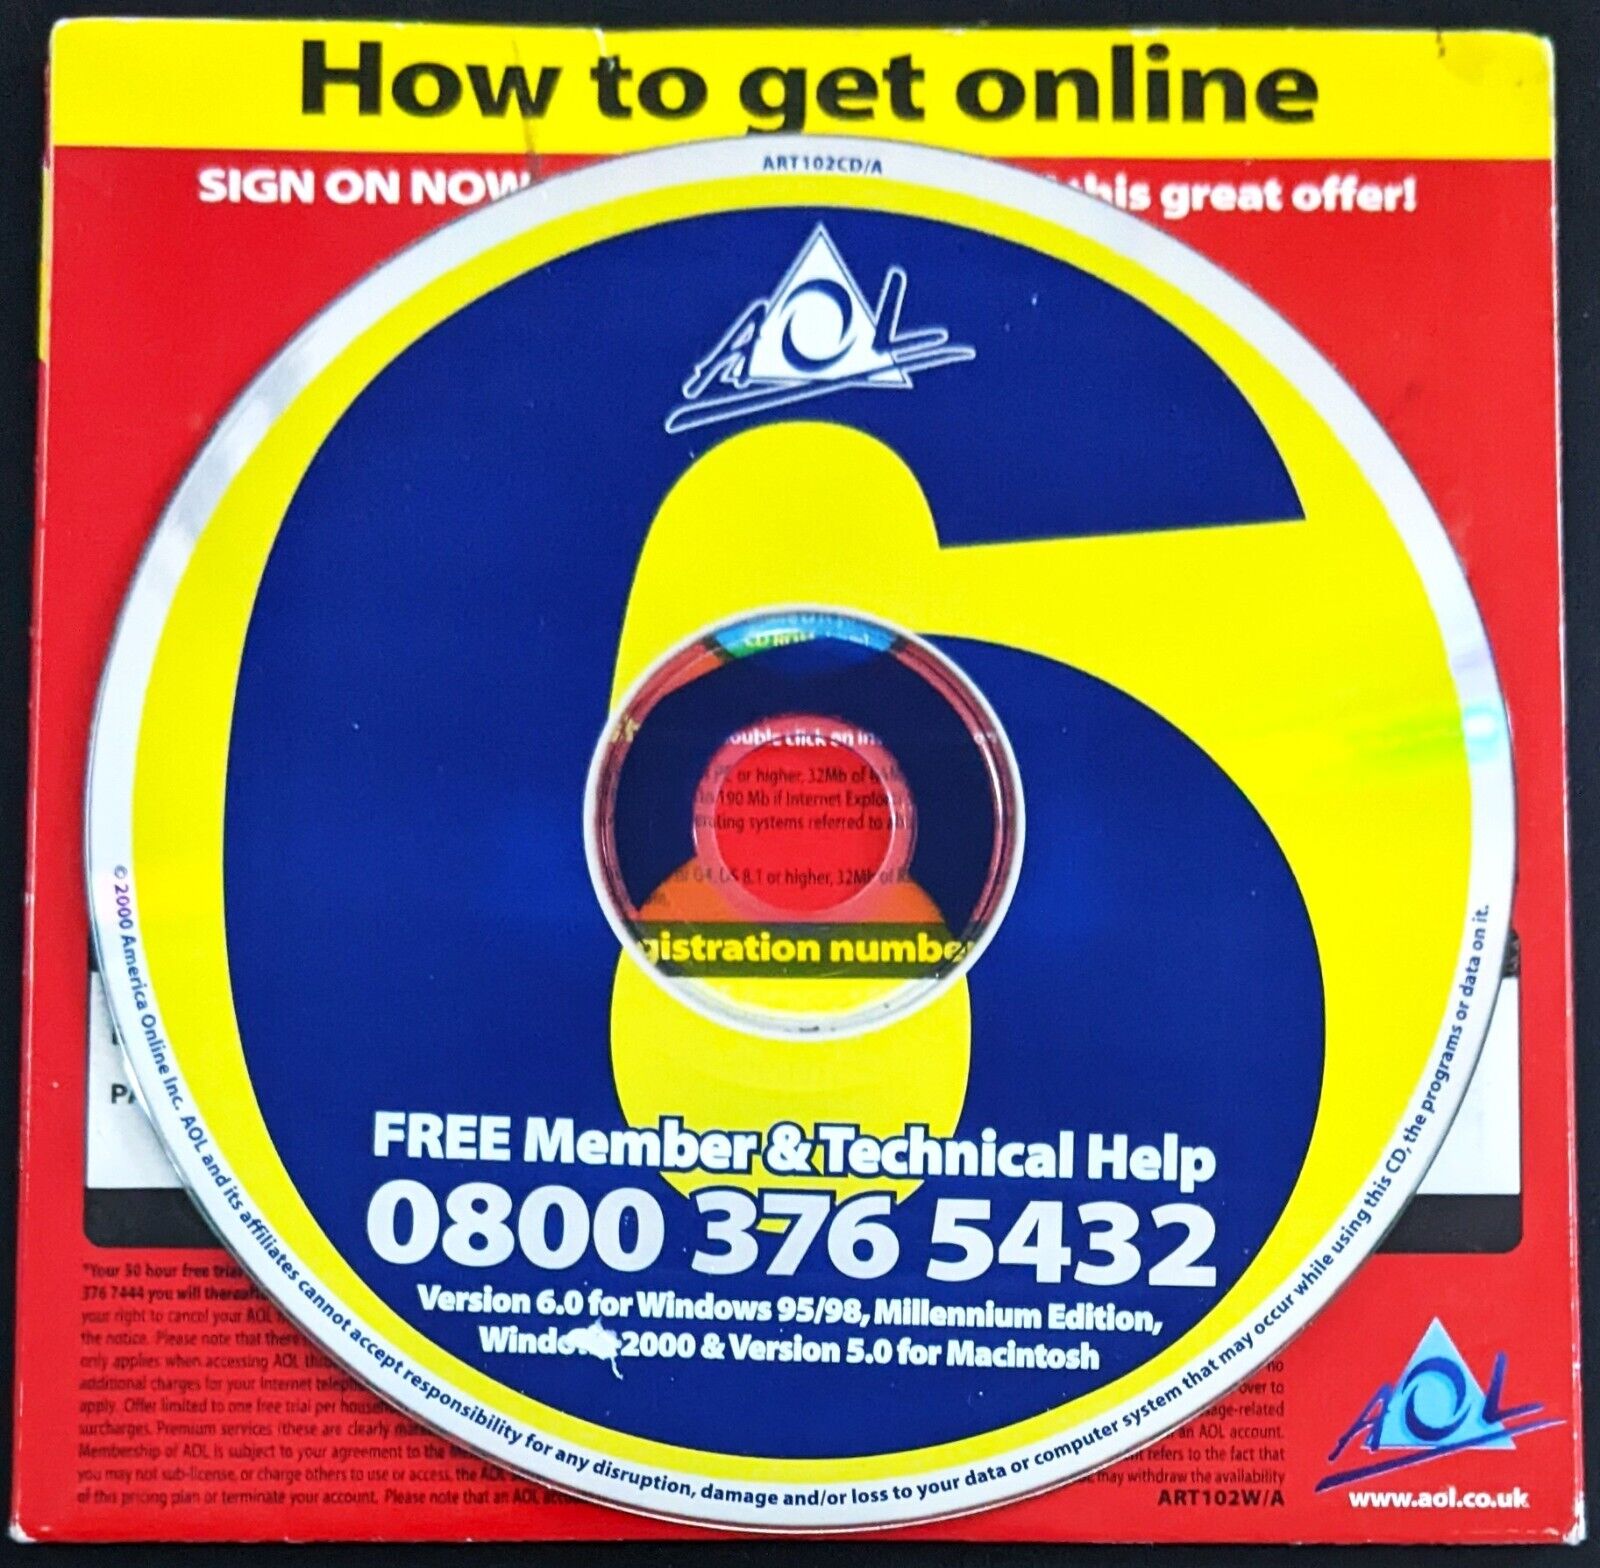 RED-YELLOW-BLUE America Online Collectible / Install Disc, AOL CD Vintage, v6.0